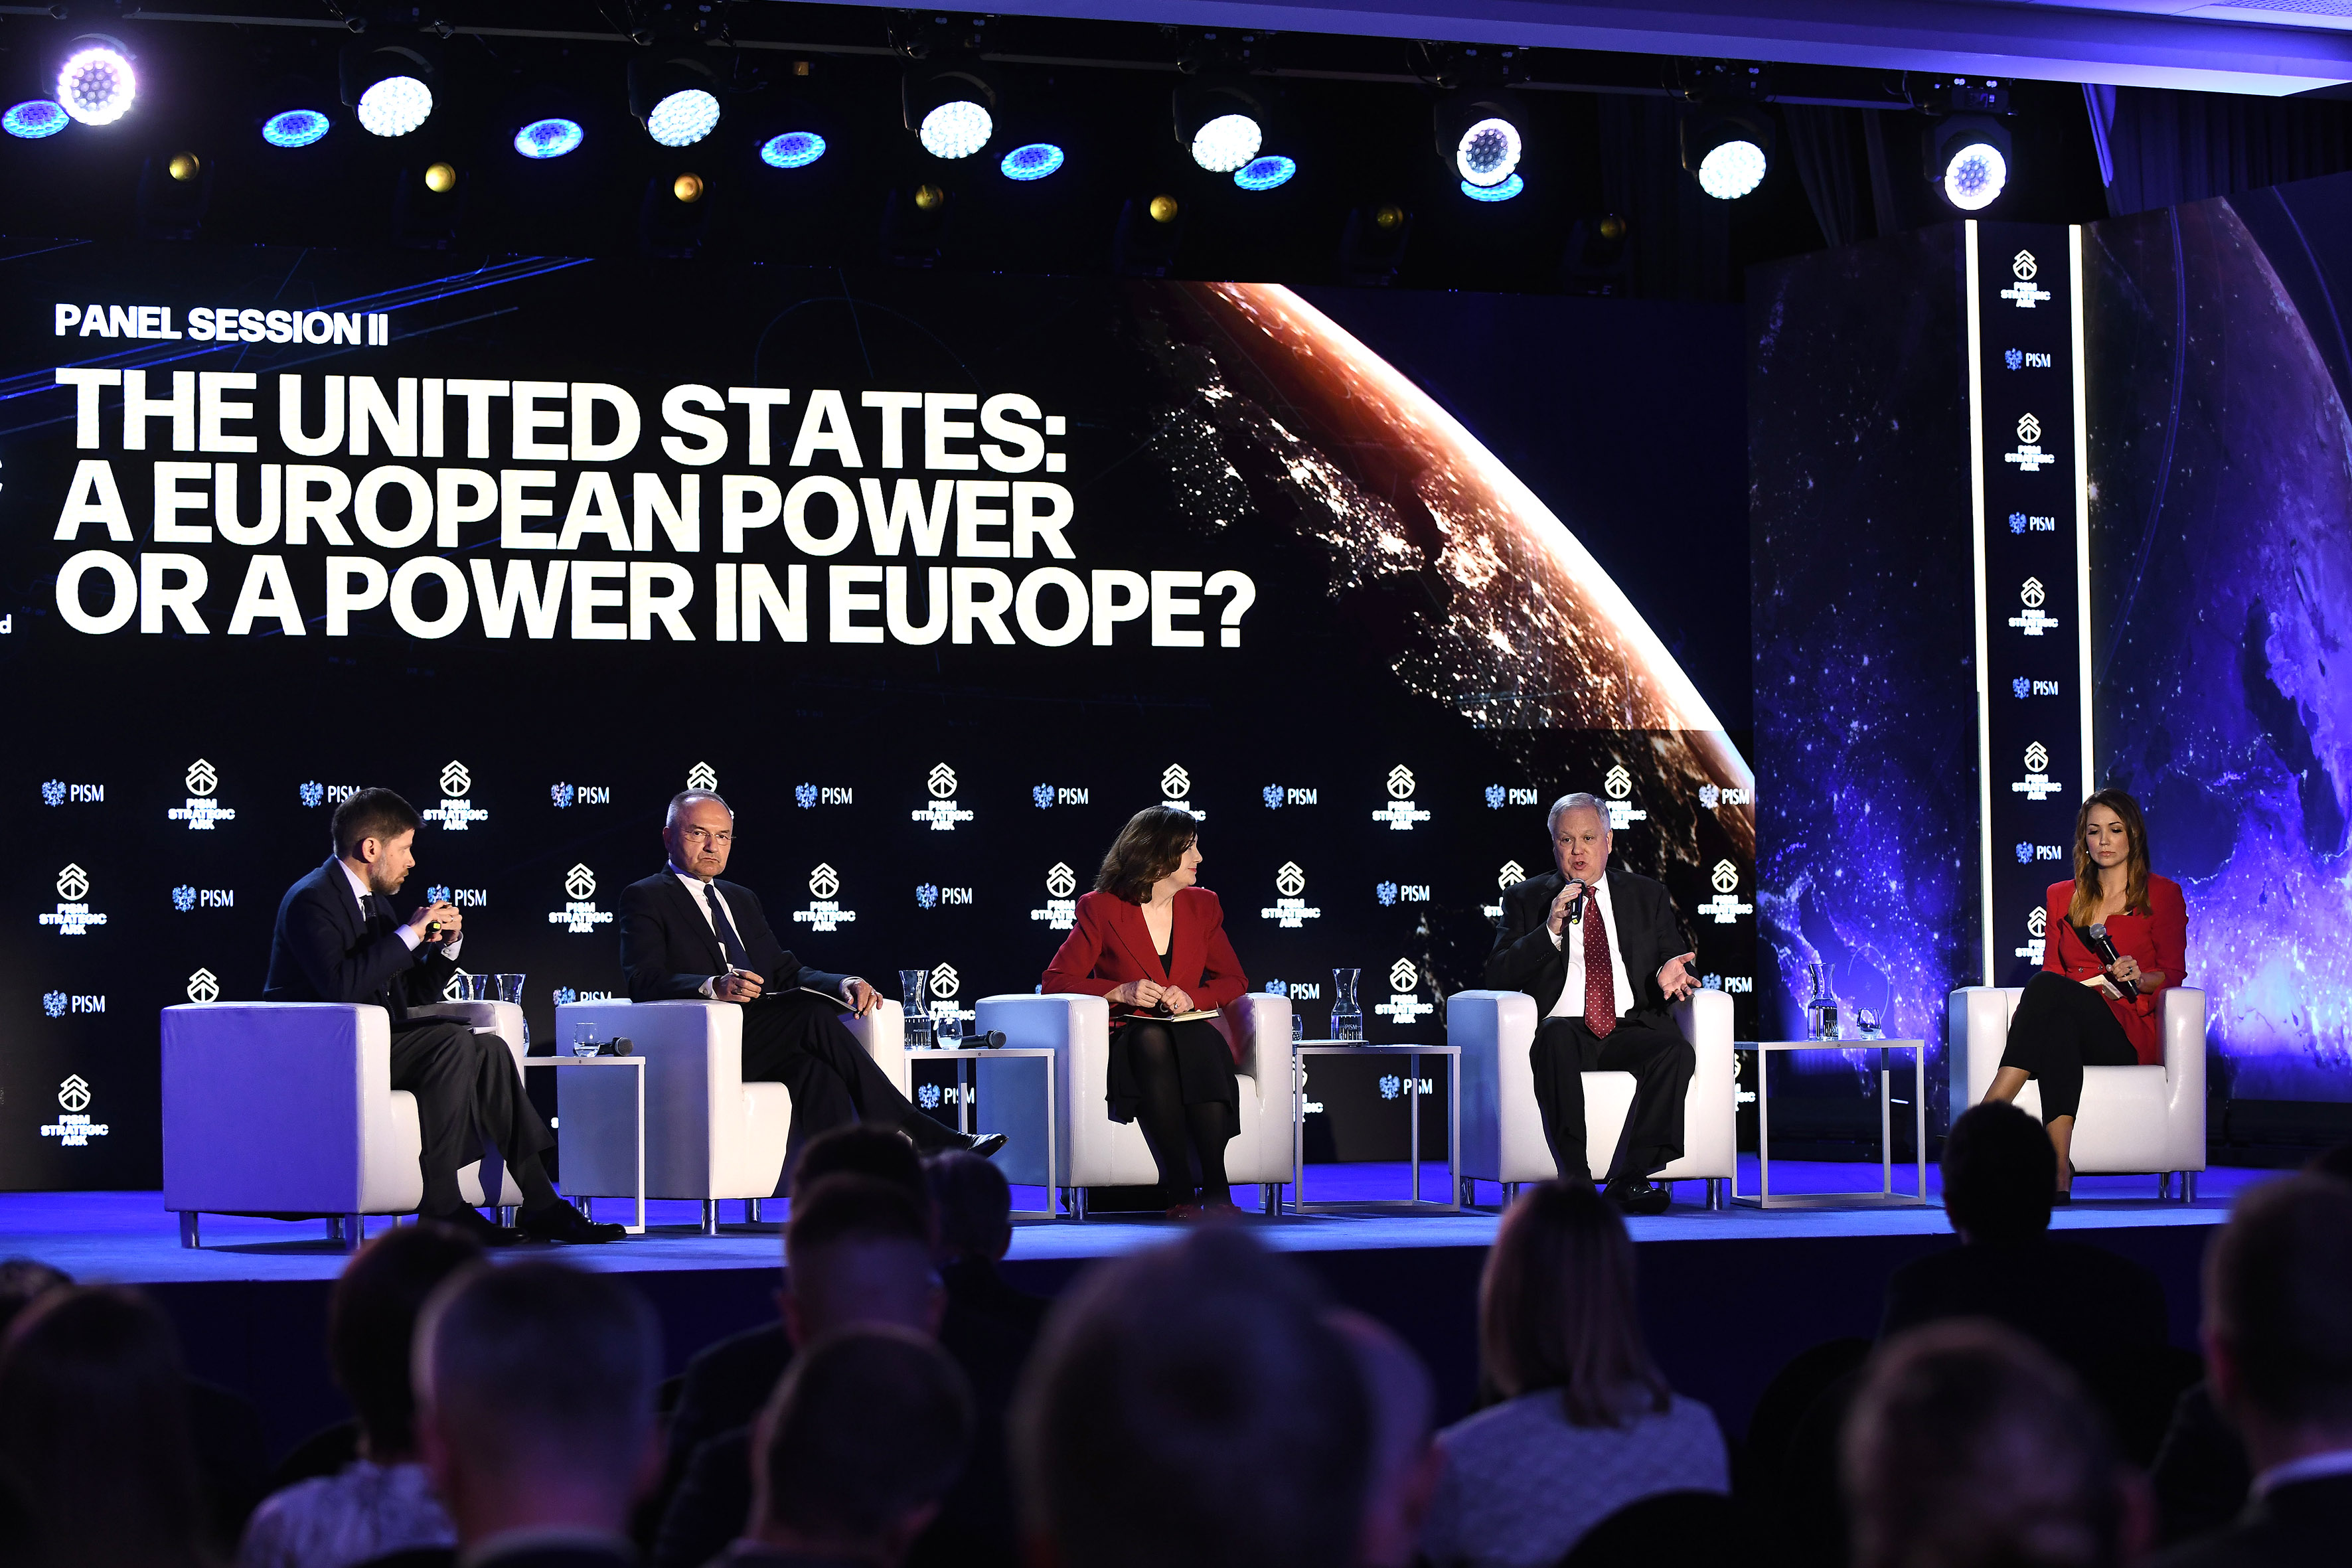 Panel Session II—The United States: A European Power or a Power in Europe?